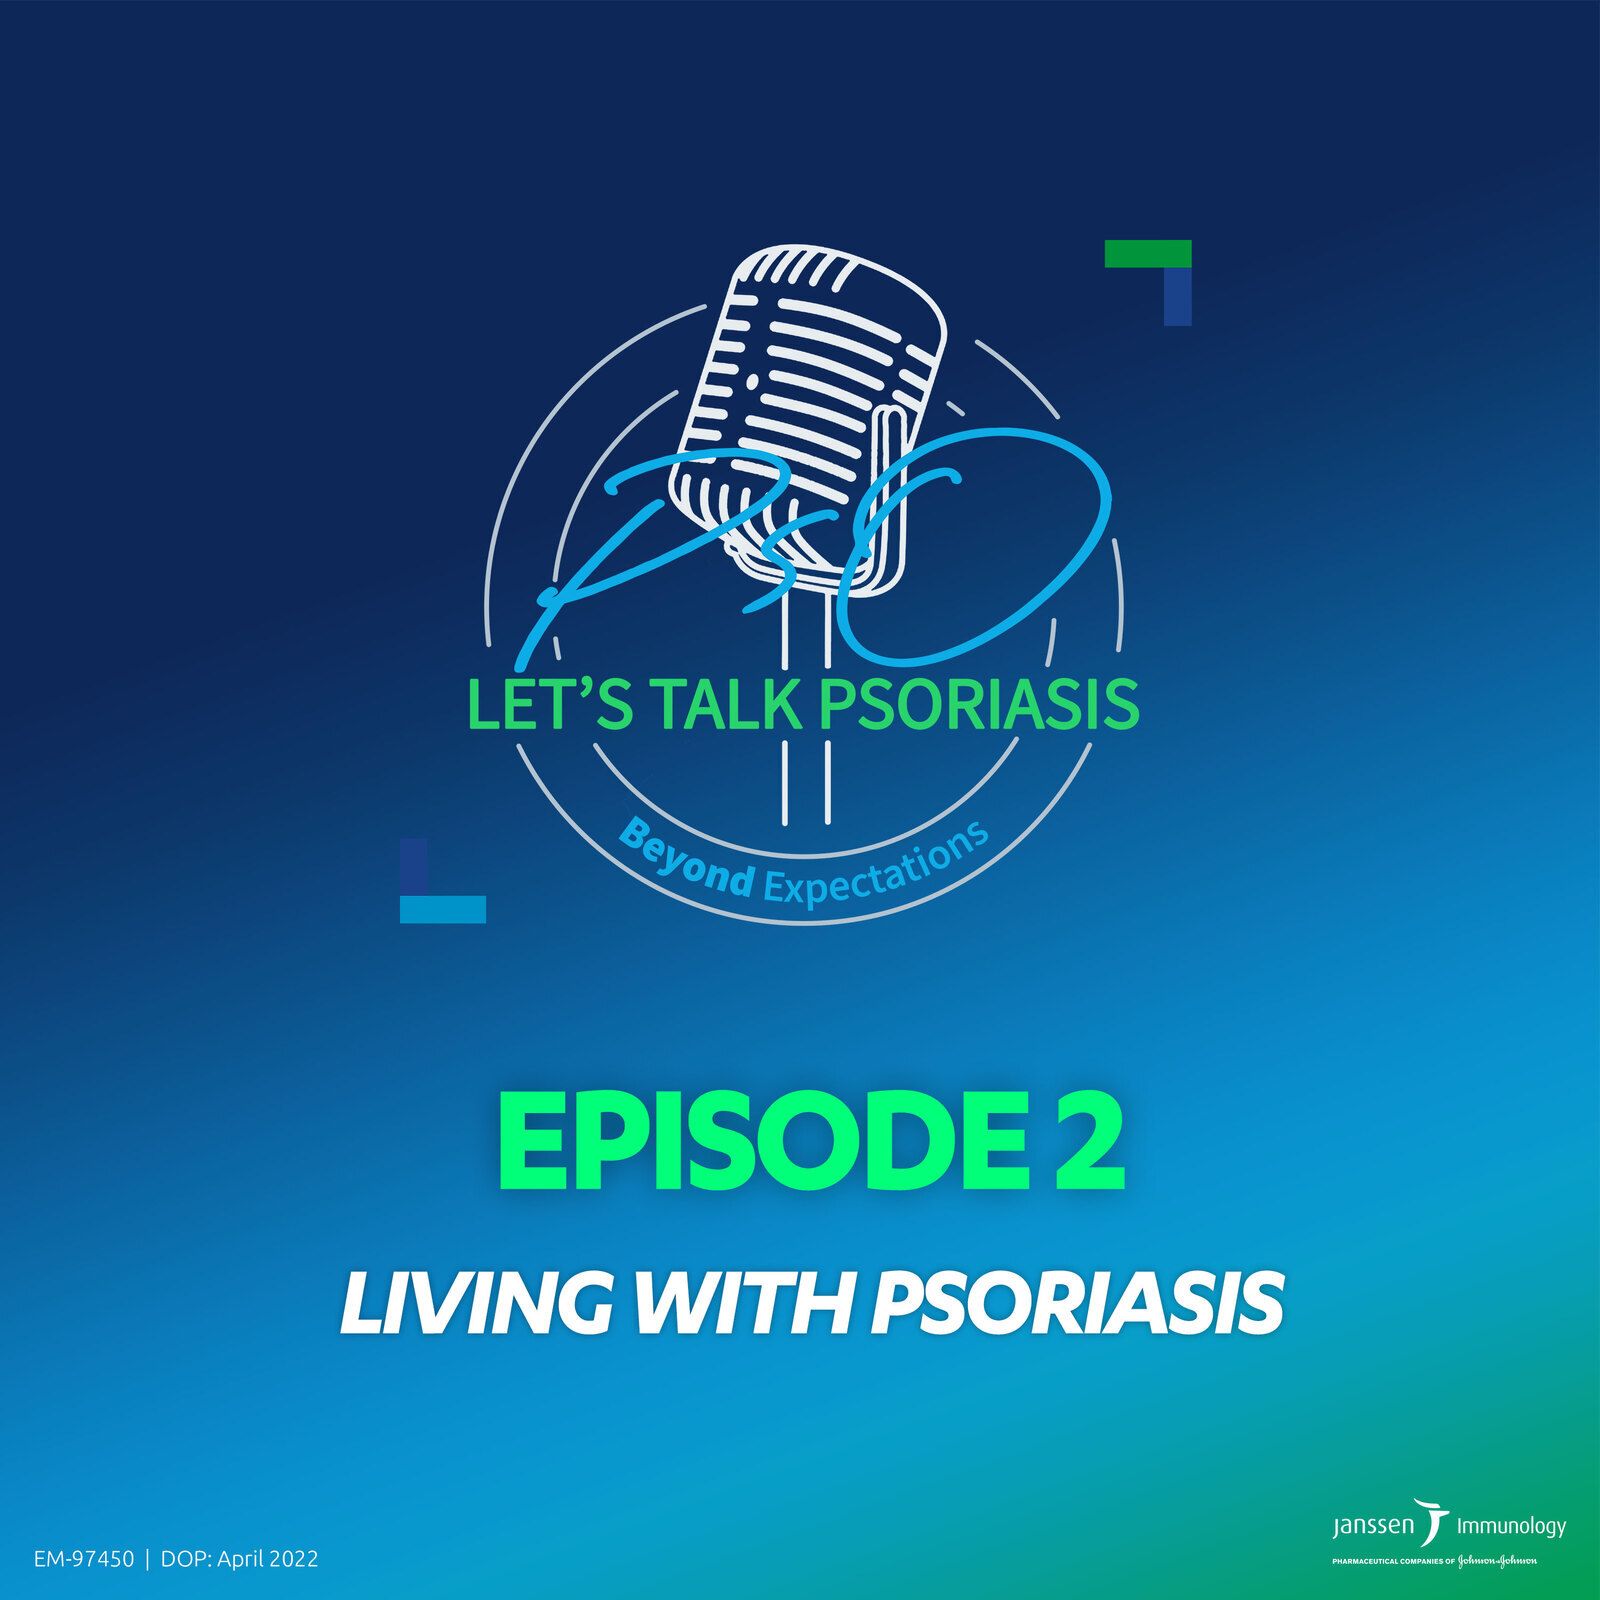 2: Episode 2 - Living with psoriasis